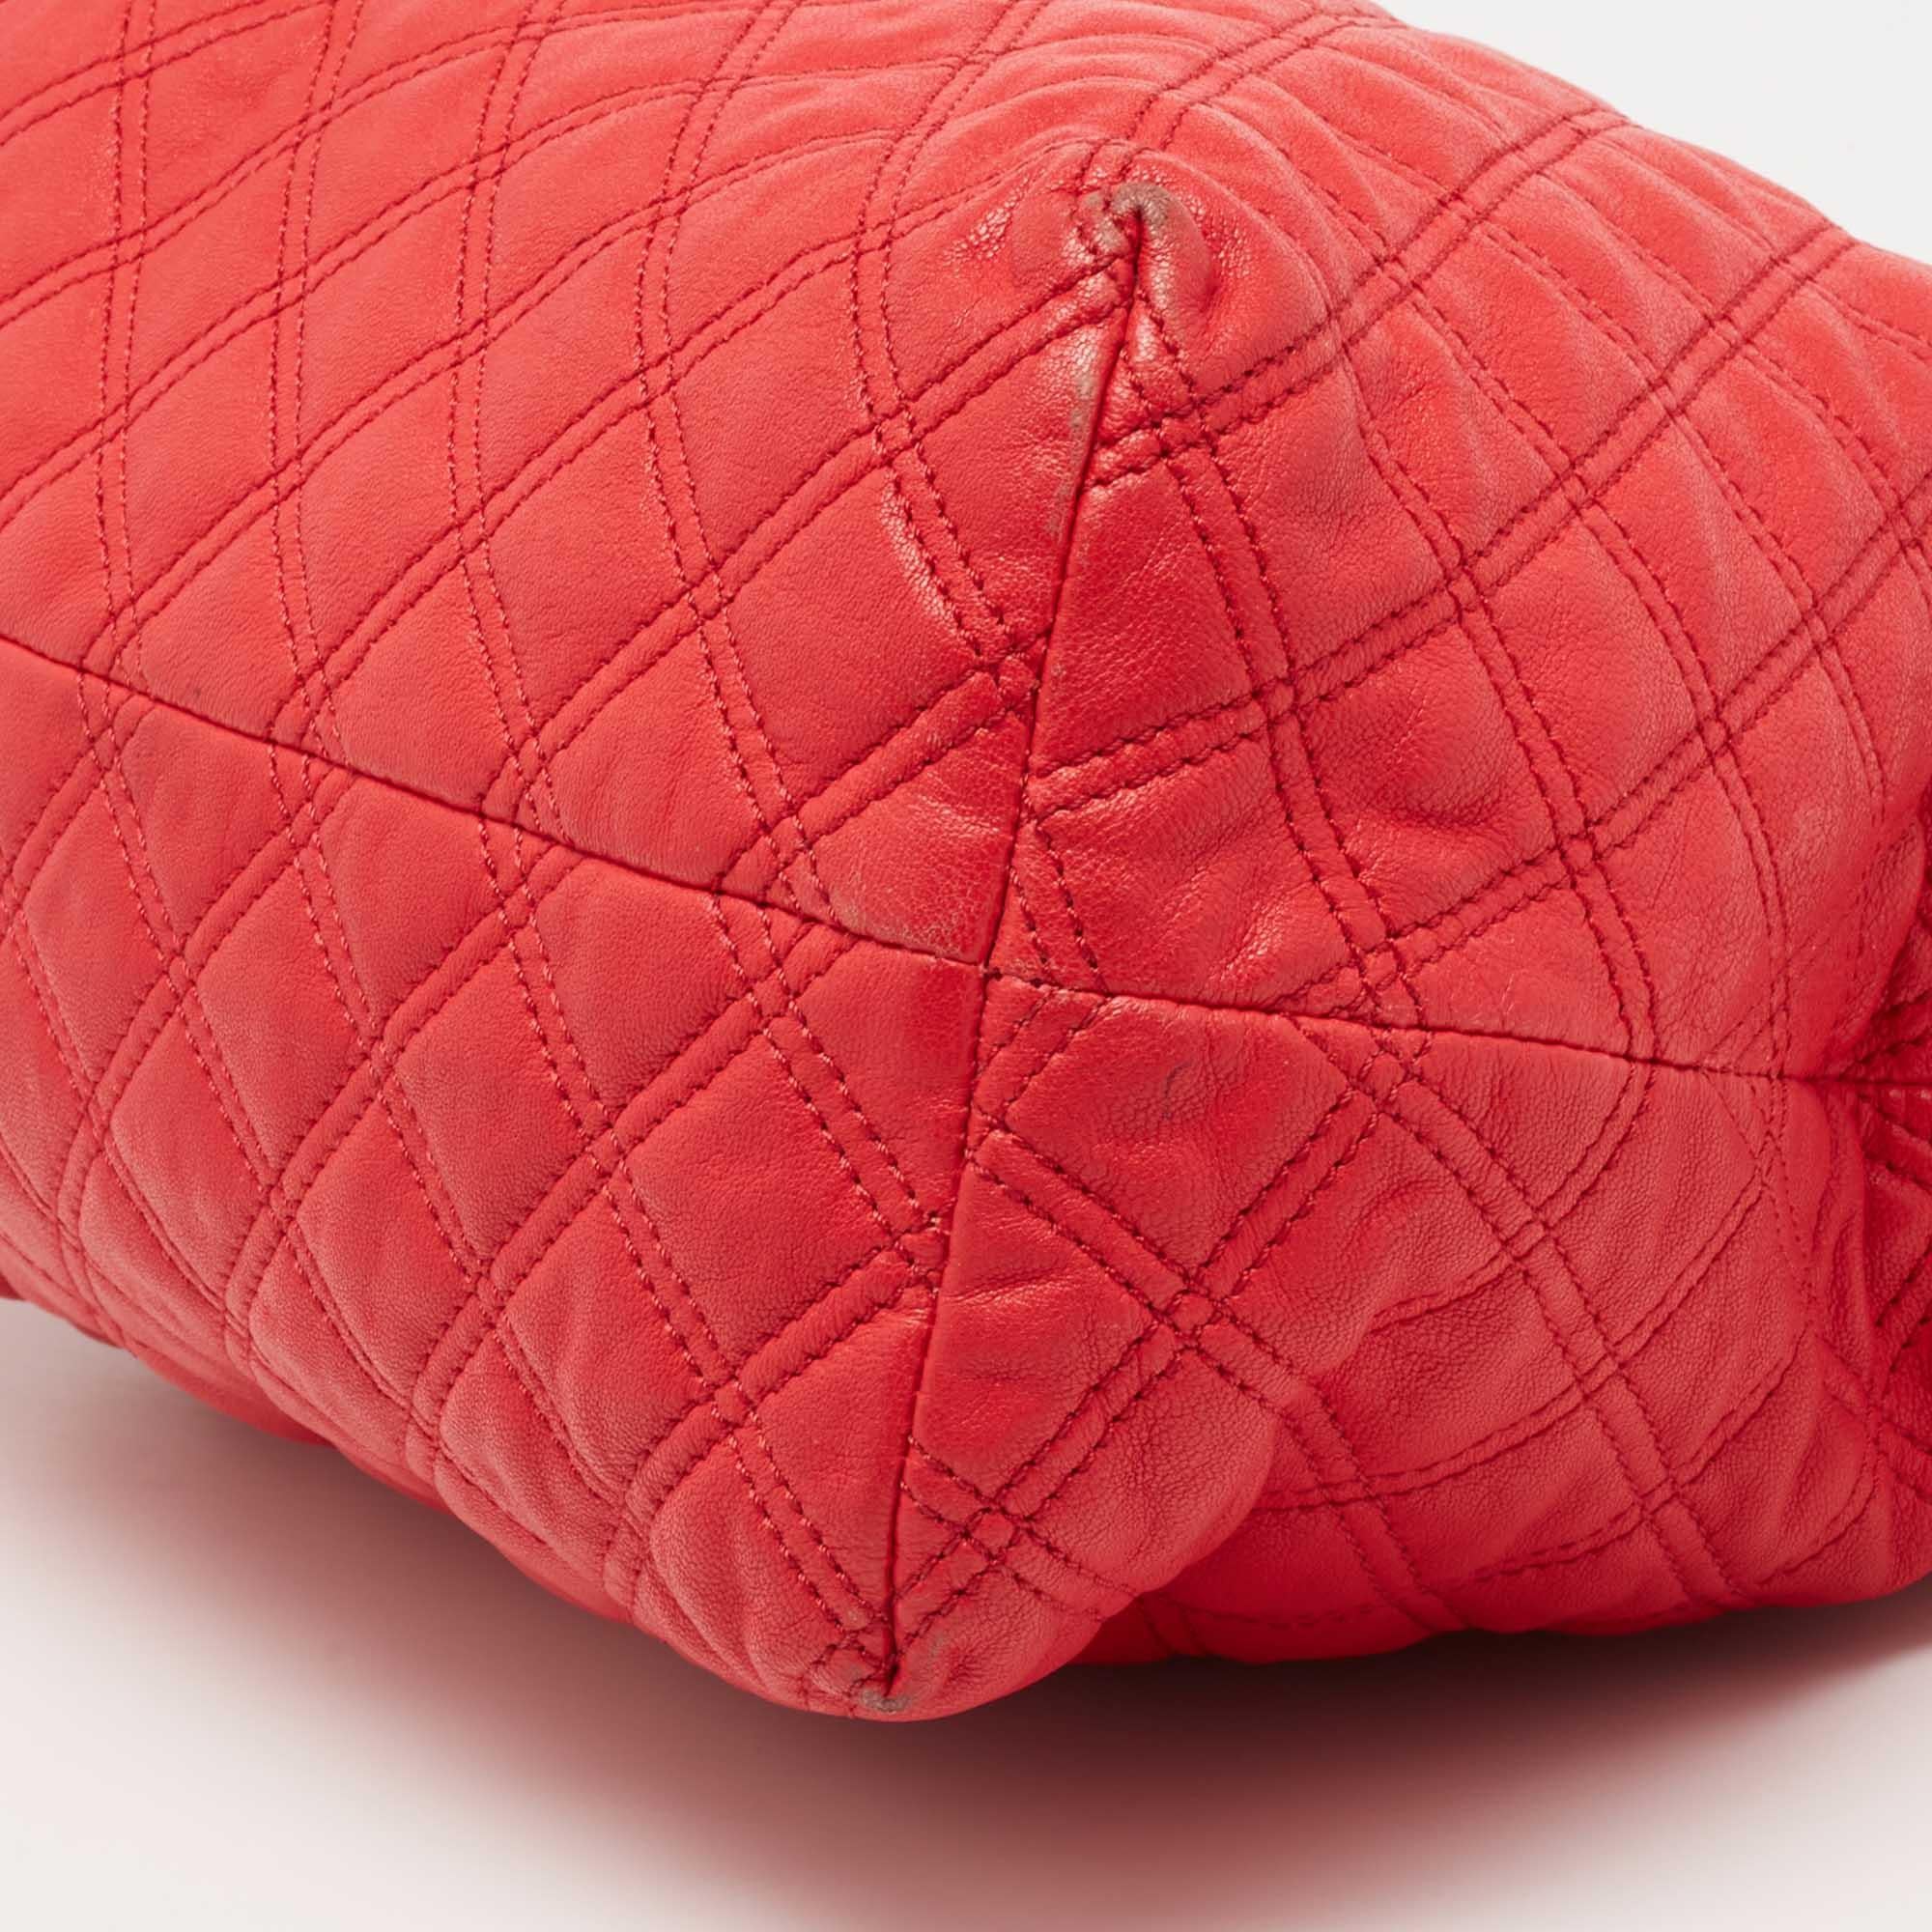 Marc Jacobs Coral Red Quilted Leather Rio Satchel In Good Condition For Sale In Dubai, Al Qouz 2